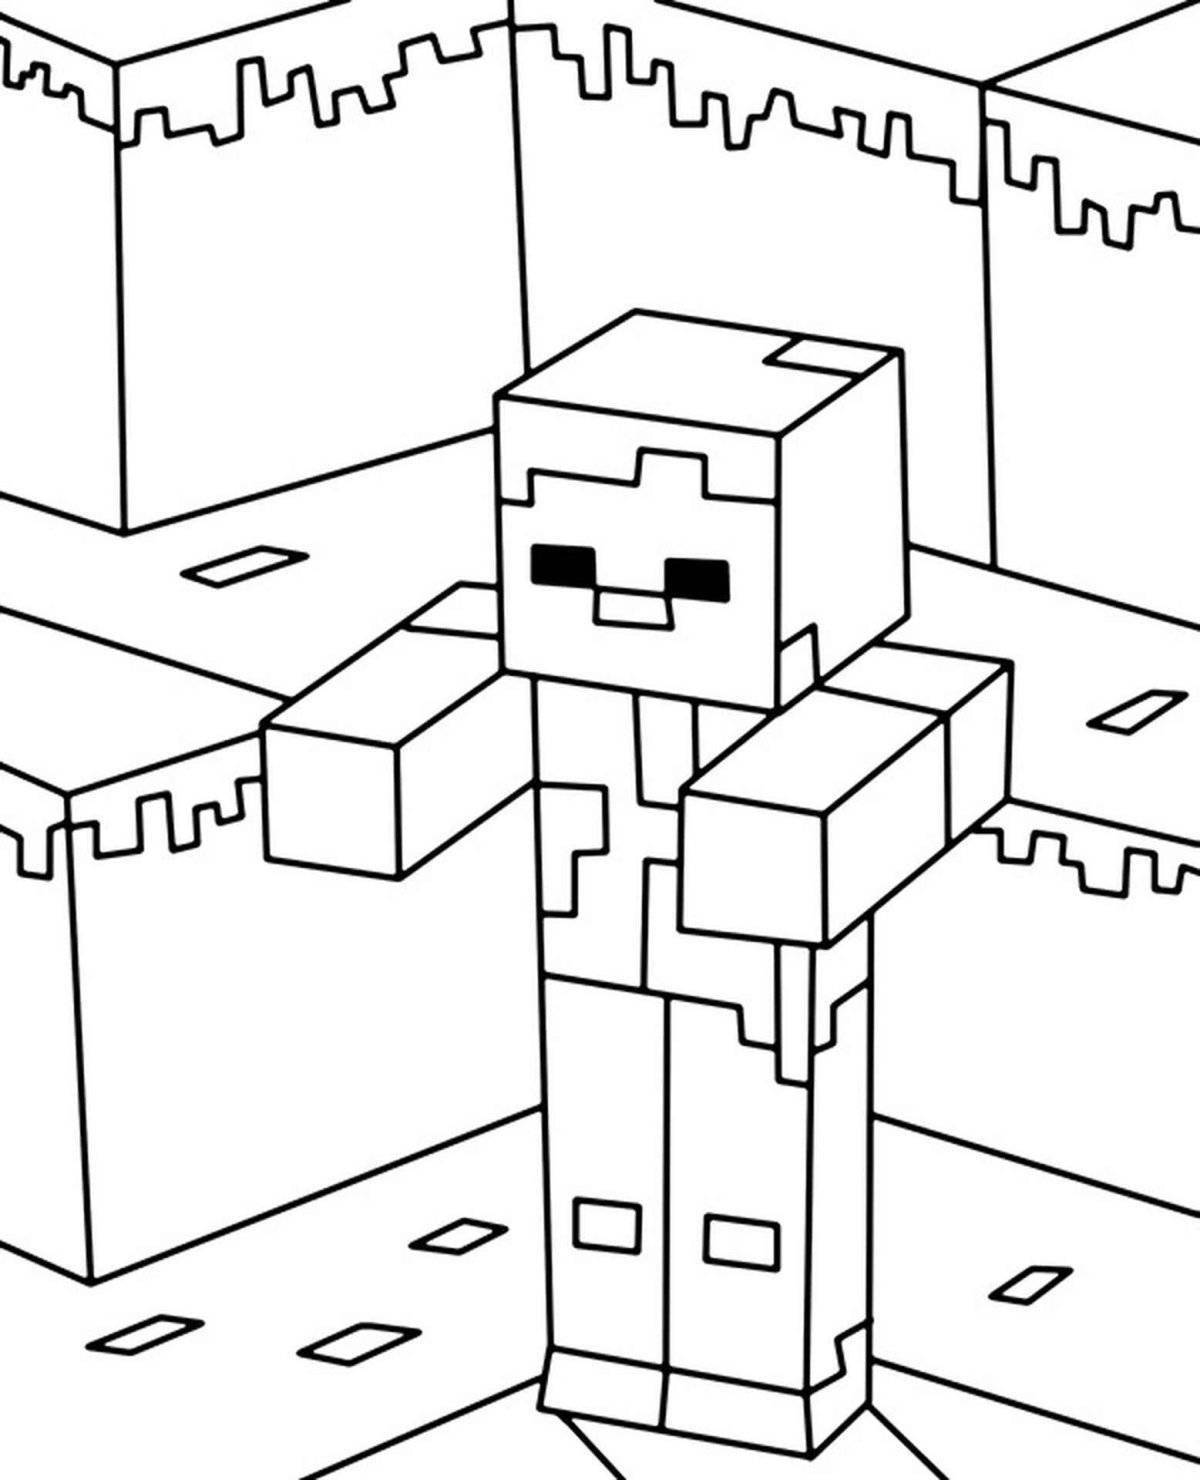 Exquisite minecraft style coloring book